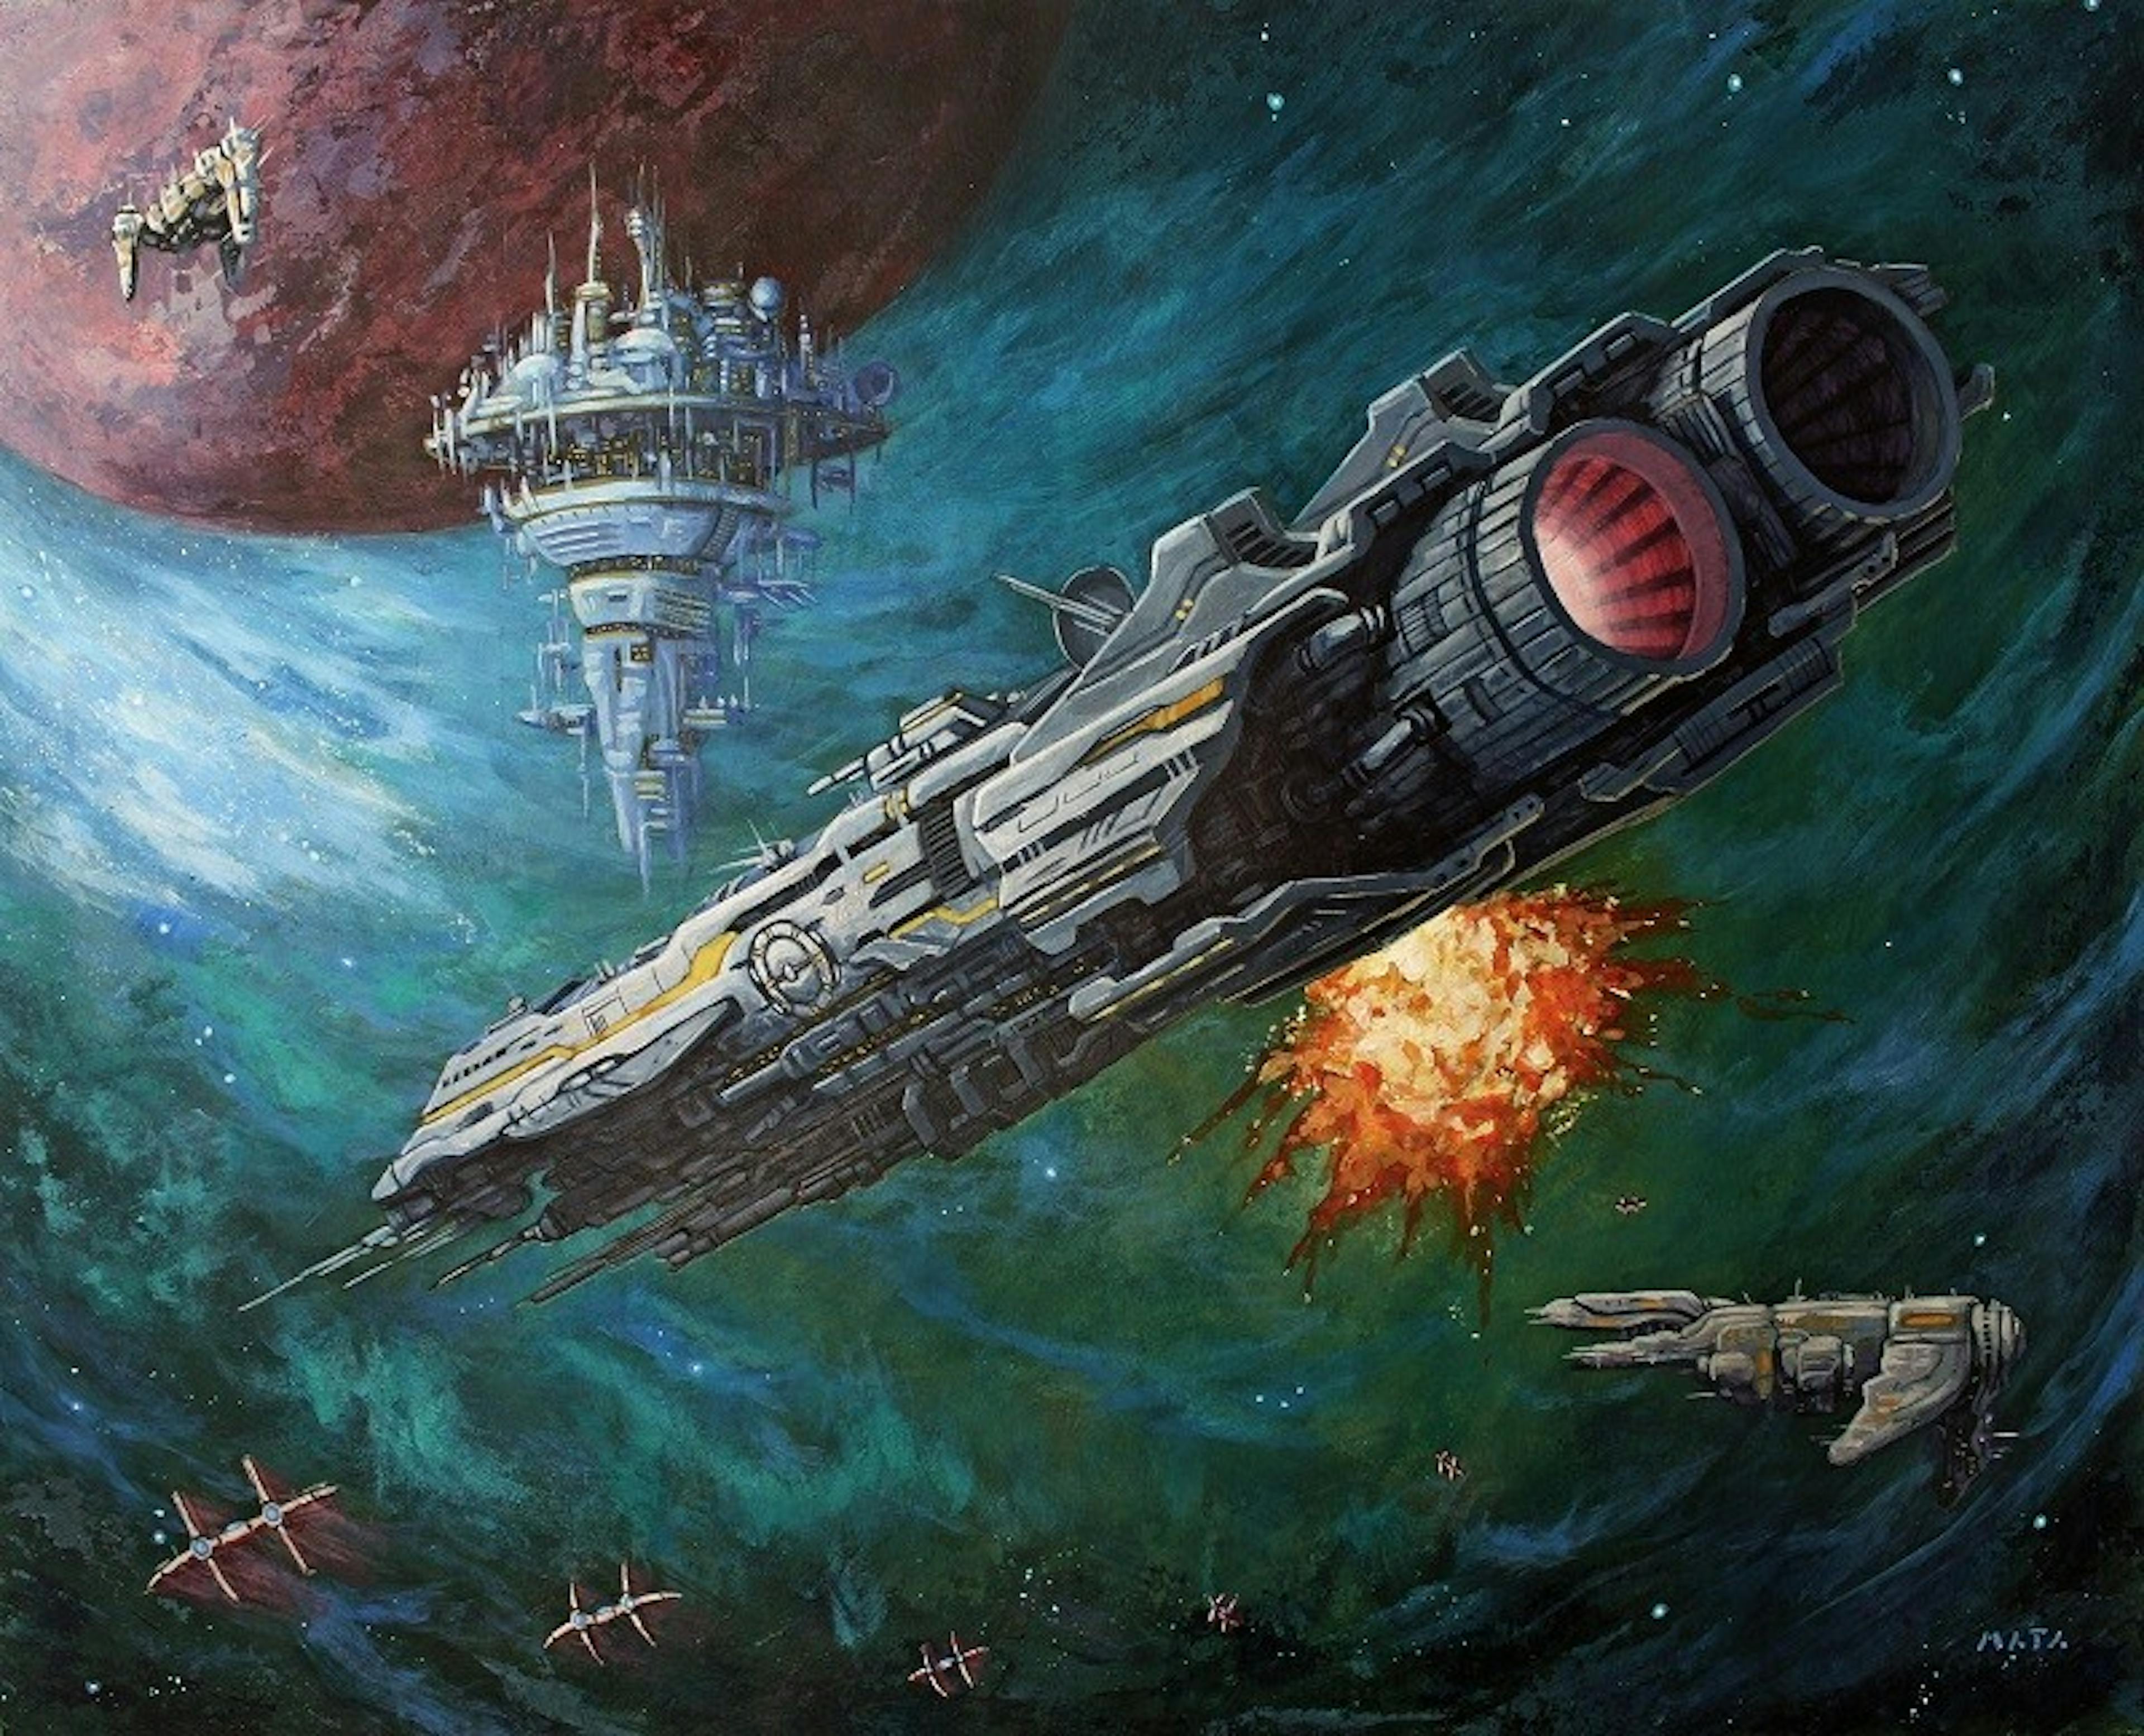 A space ship under attack